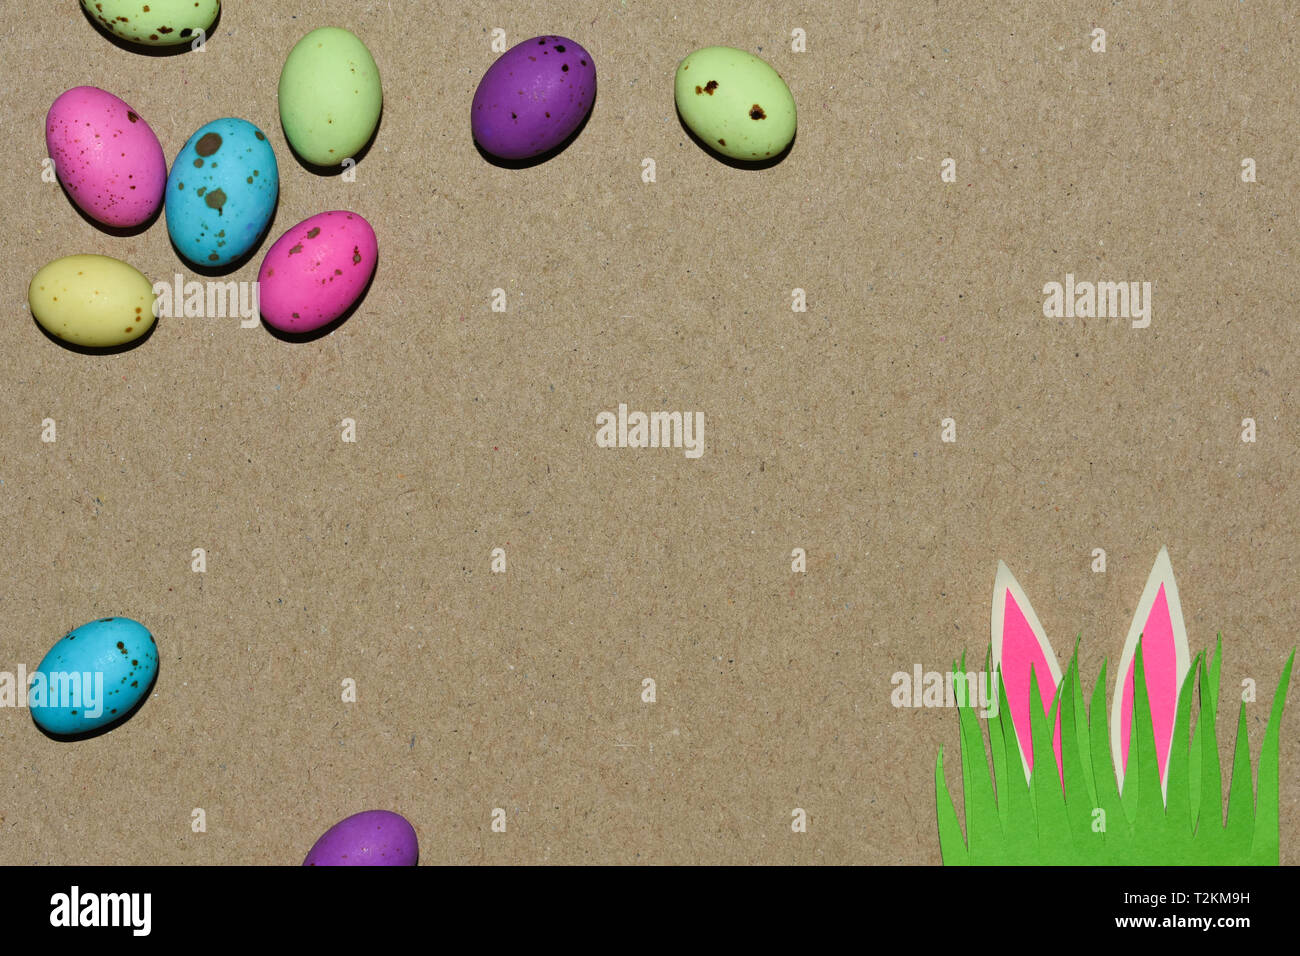 Speckled Eggs With Grass Patch And Rabbit Ears On Natural Cardboard Stock Photo